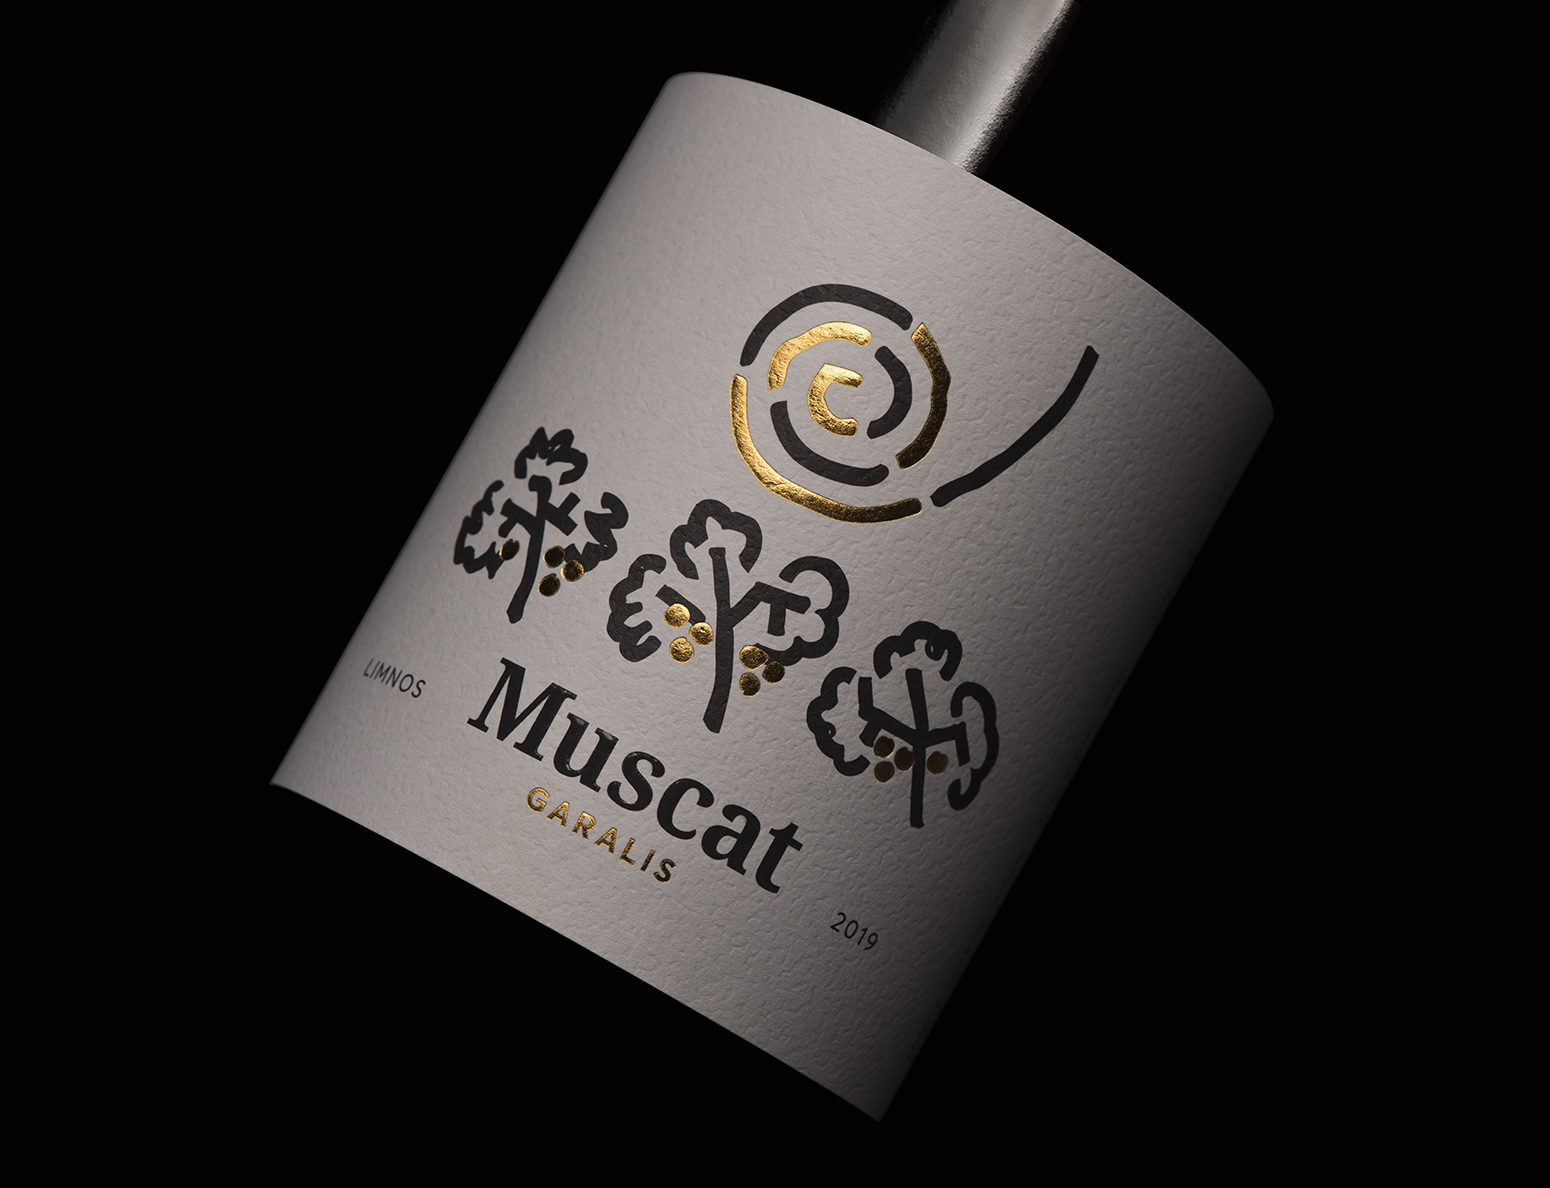 Packaging Label Design for Garalis Muscat, Limnio Wines by Manos Siganos